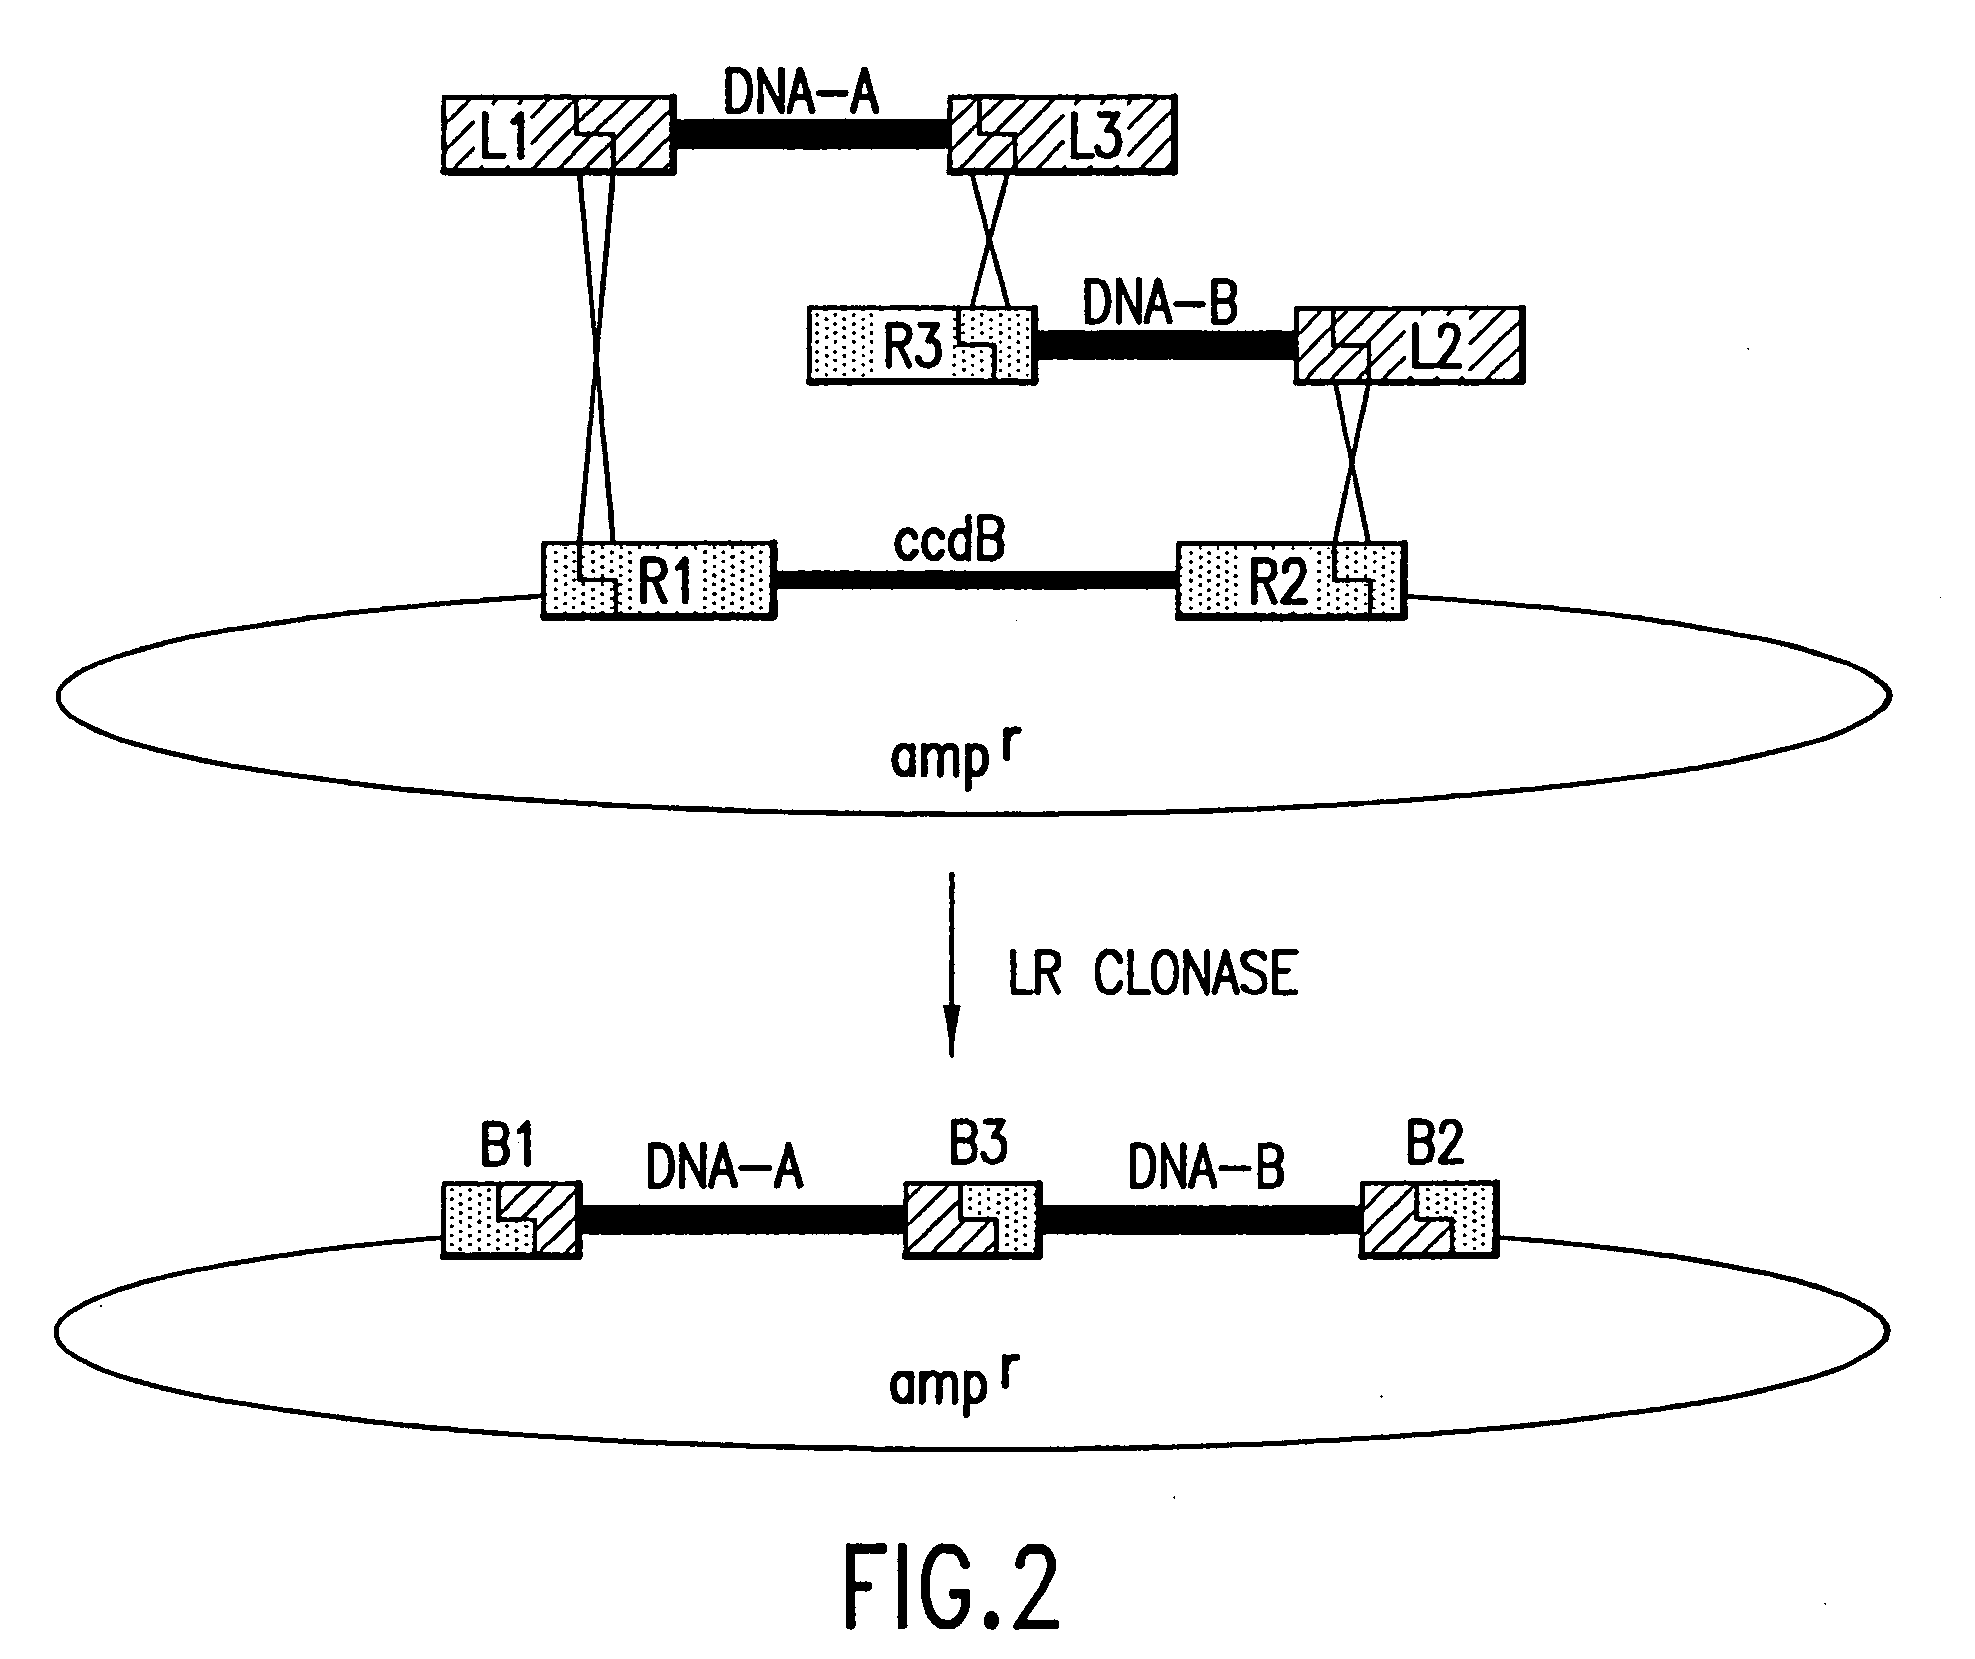 Use of multiple recombination sites with unique specificity in recombinational cloning